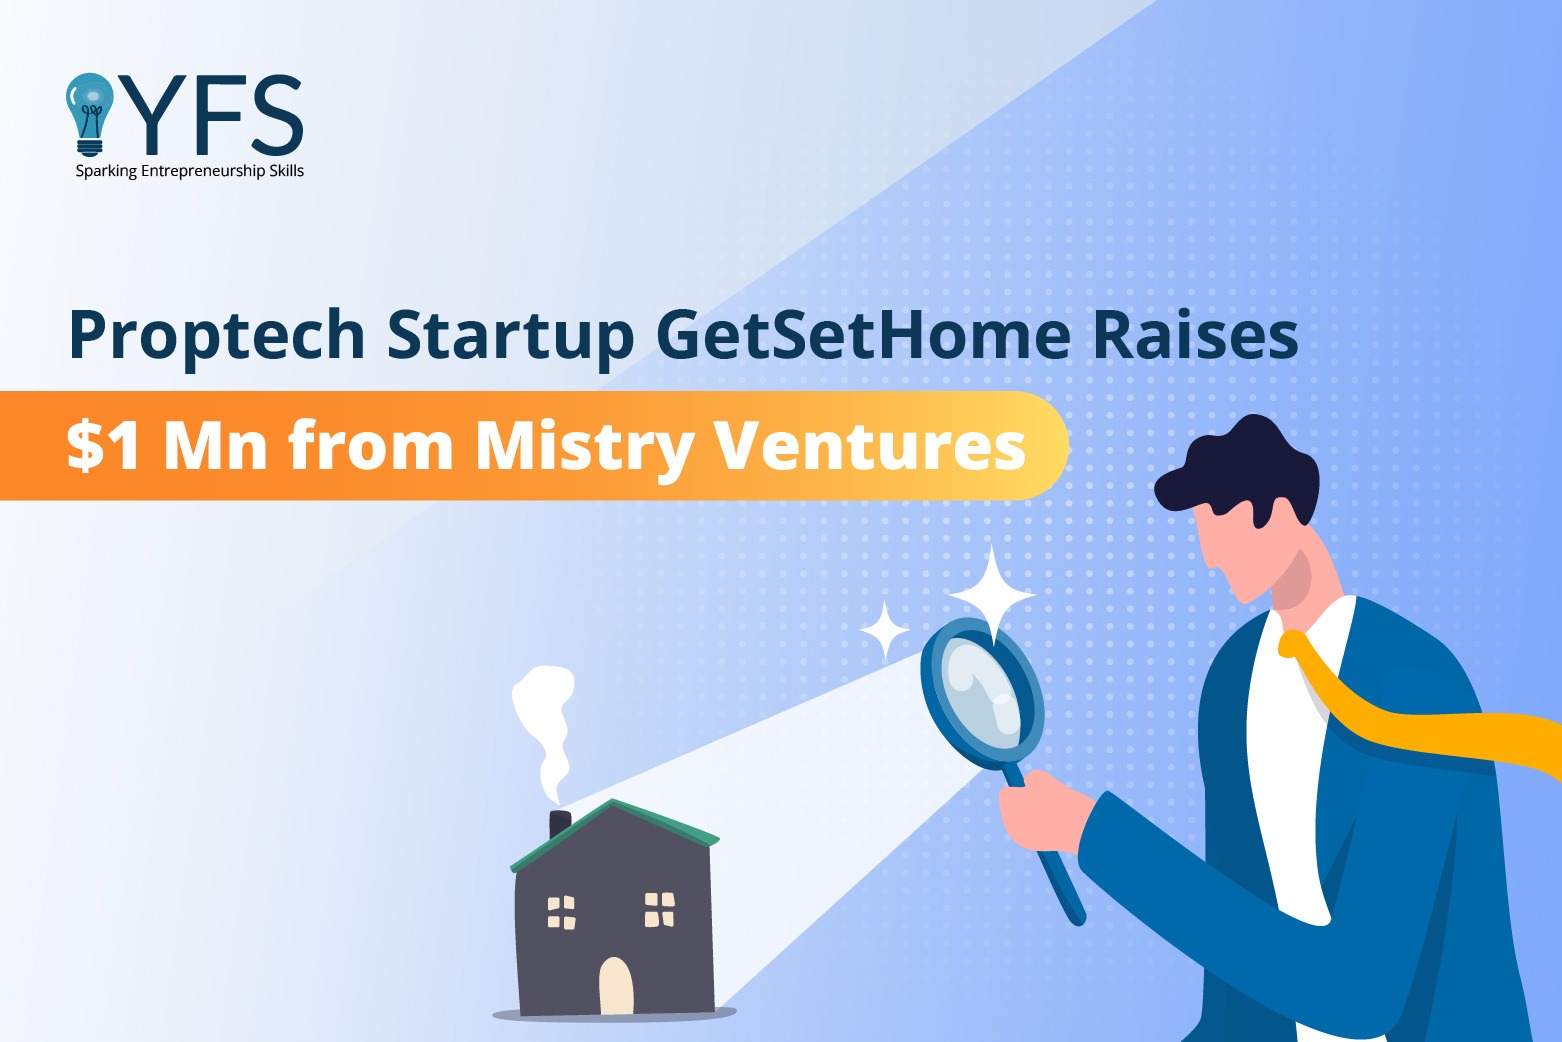 Proptech Startup GetSetHome Raises $1Mn from Mistry Ventures